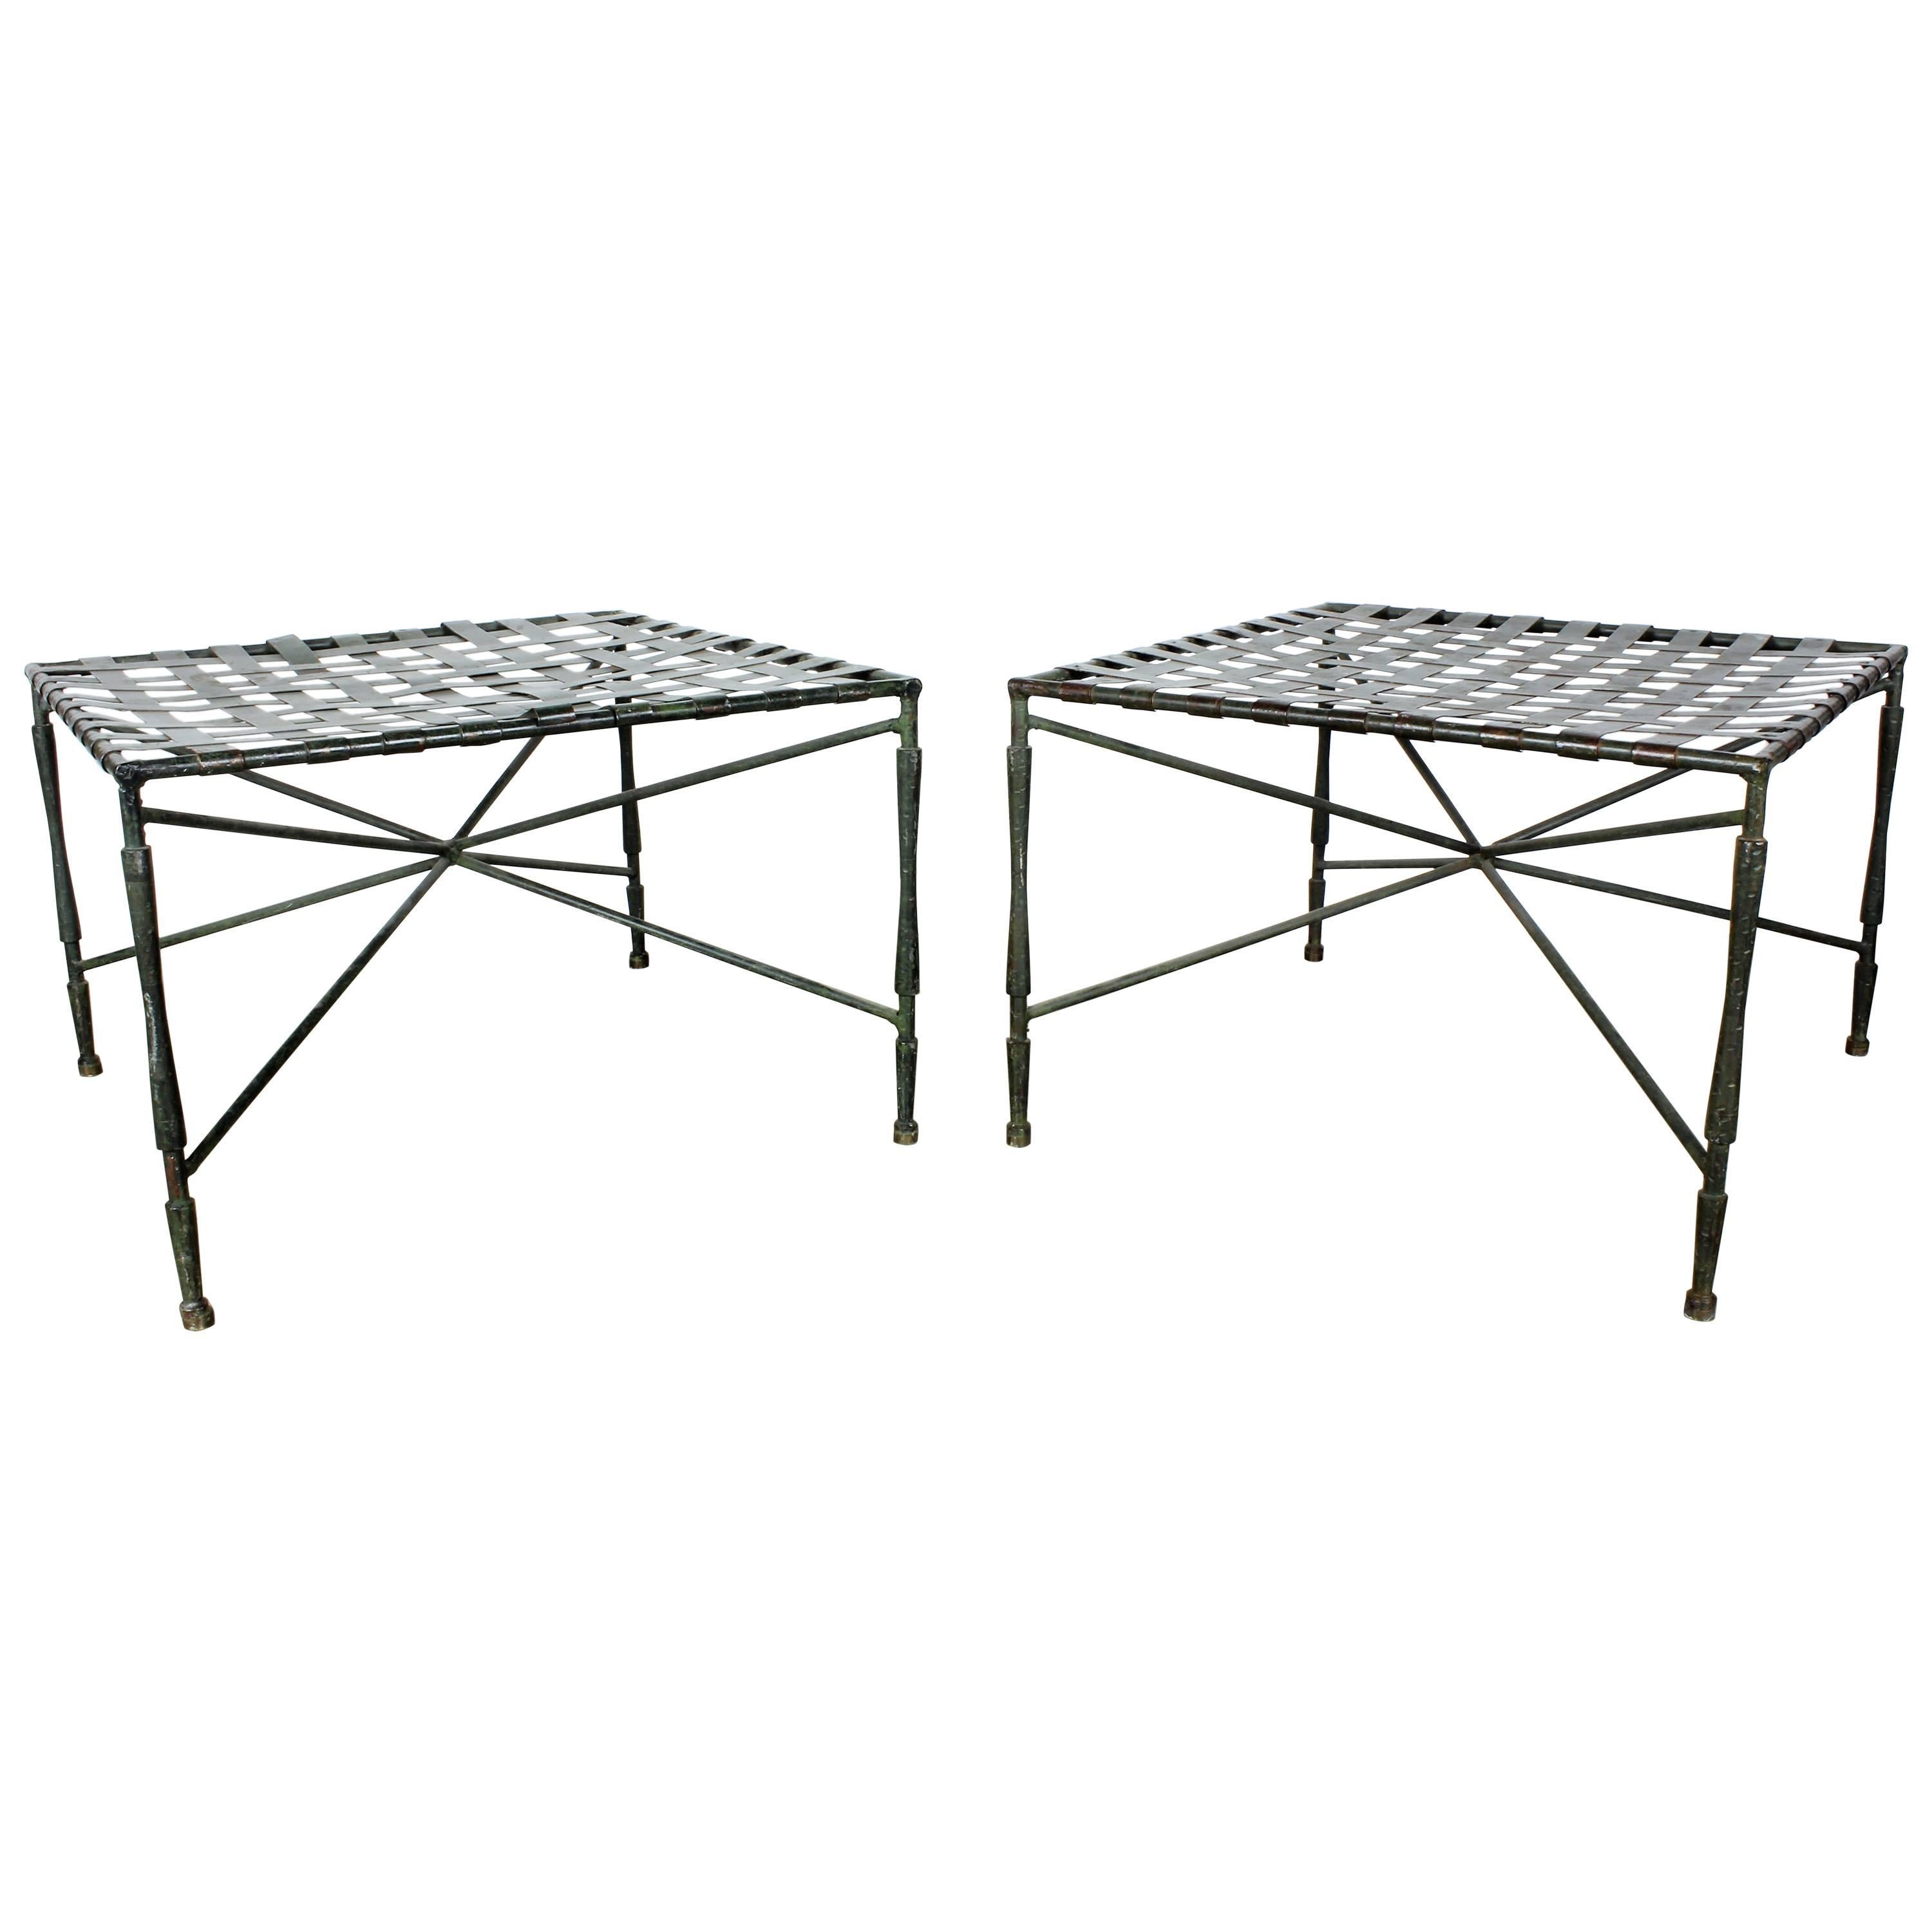 Pair of Architectural Iron Benches or Ottomans by John Salterini, 1950s